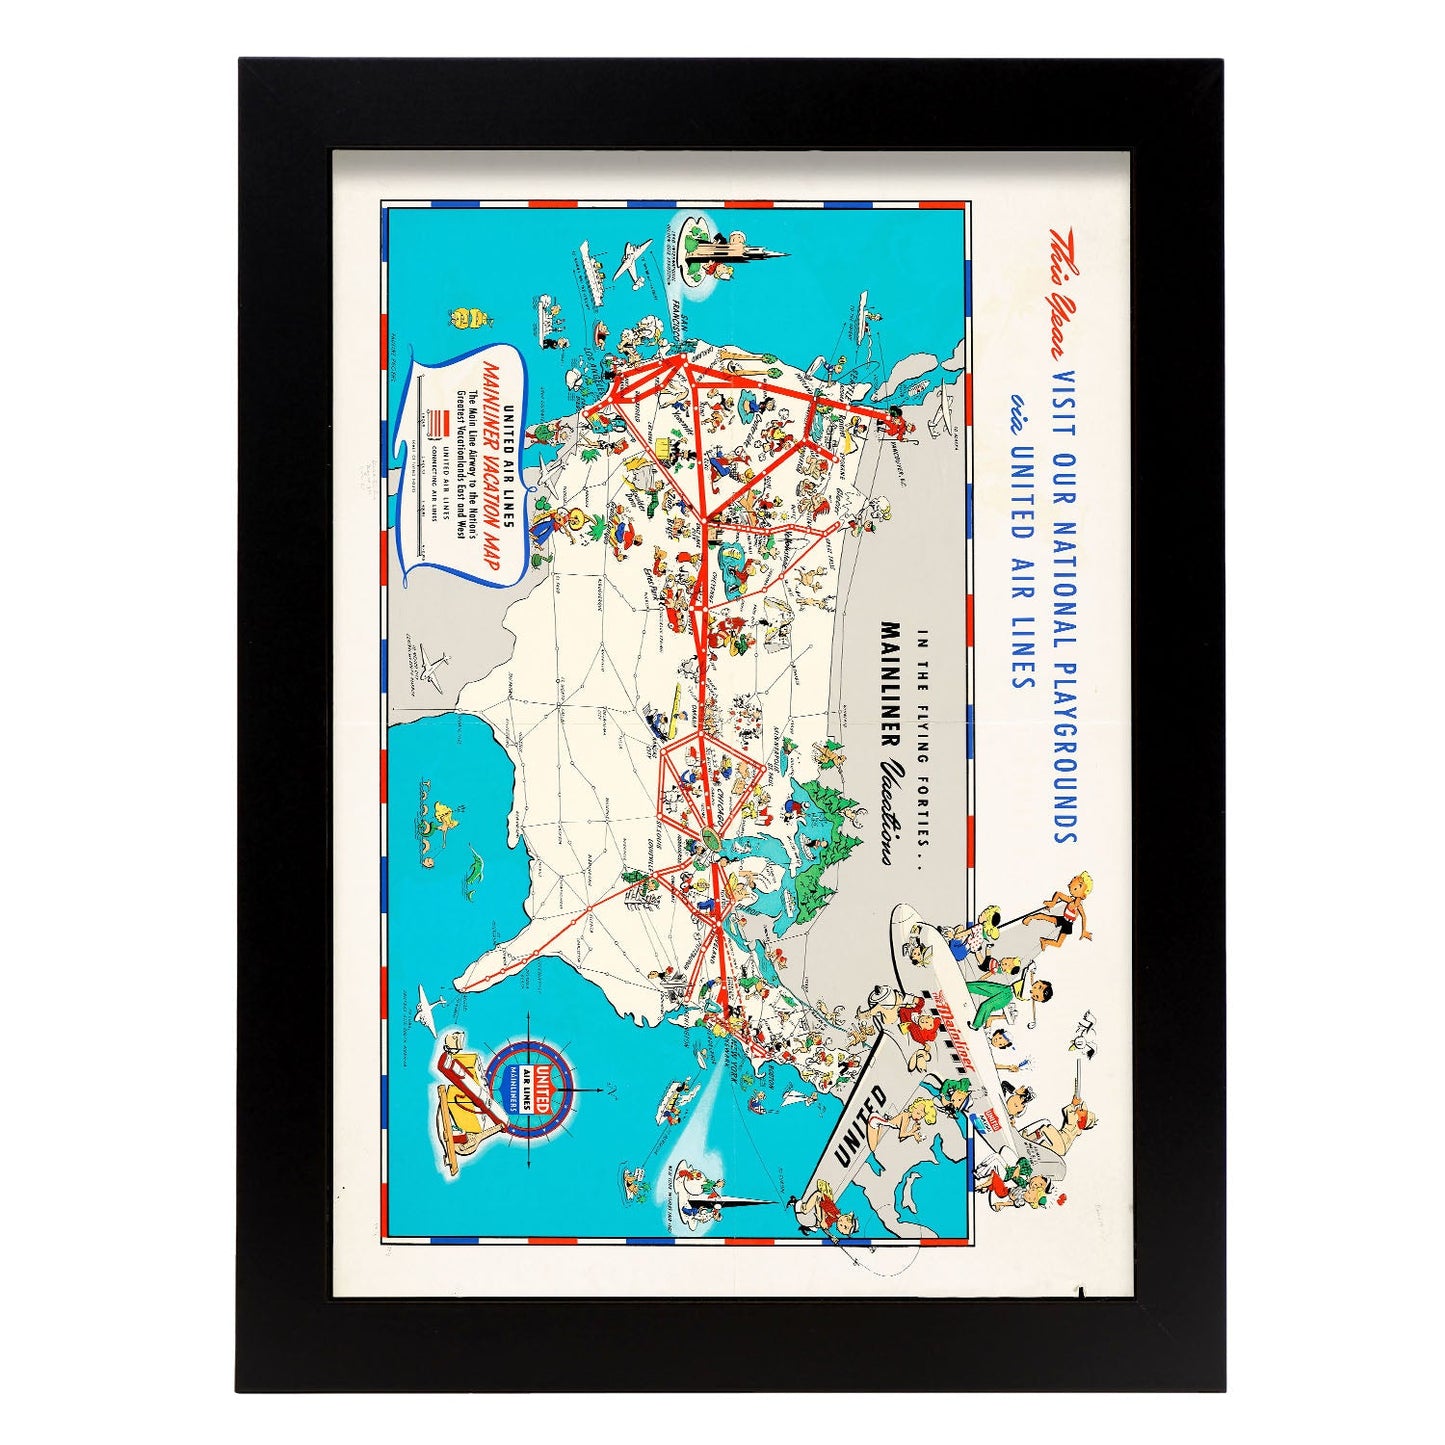 United_Air_Lines_mainliner_vacation_map_-_the_main_line_airway_to_the_nations_greatesst_vacationlands_east_and_west-Artwork-Nacnic-A4-Sin marco-Nacnic Estudio SL